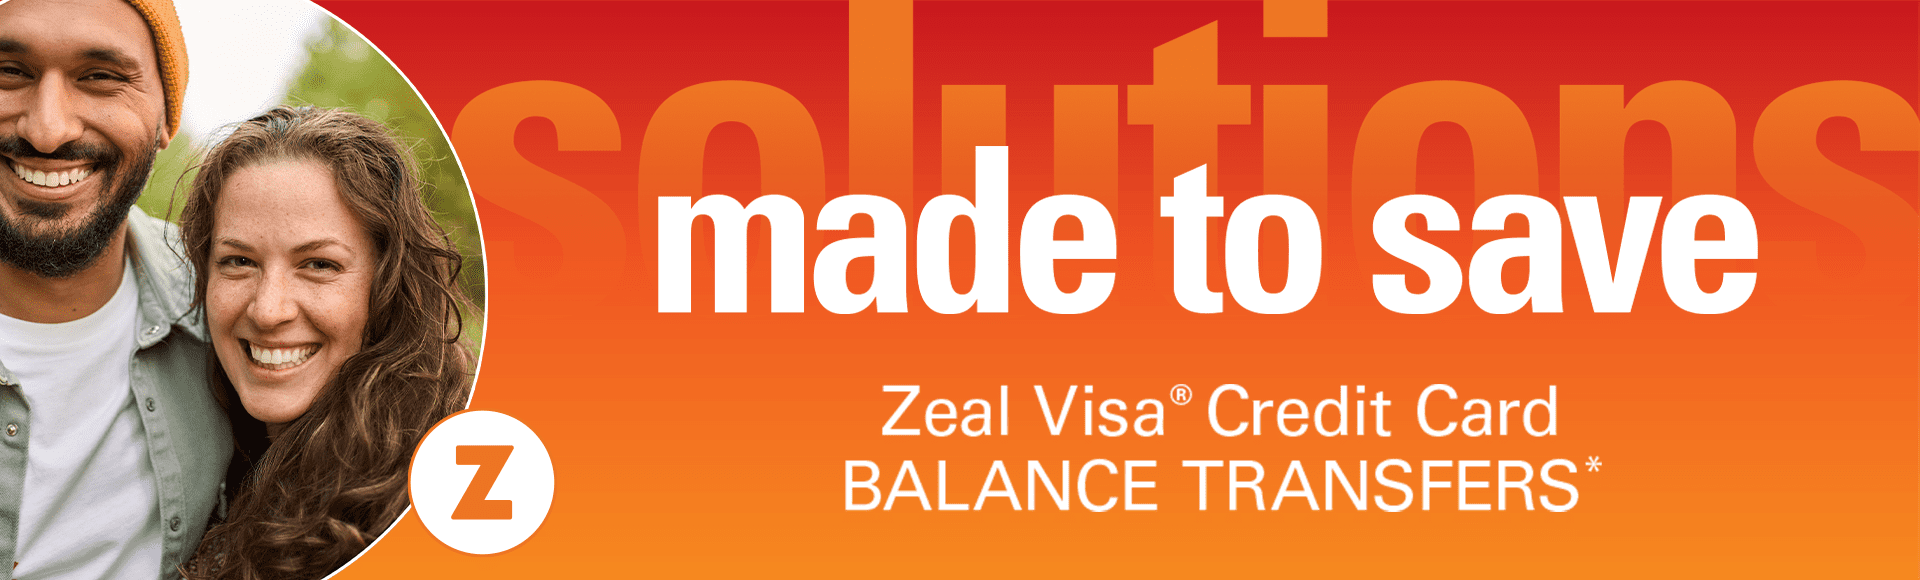 Solutions made to save. Zeal Visa Credit Card Balance transfer.